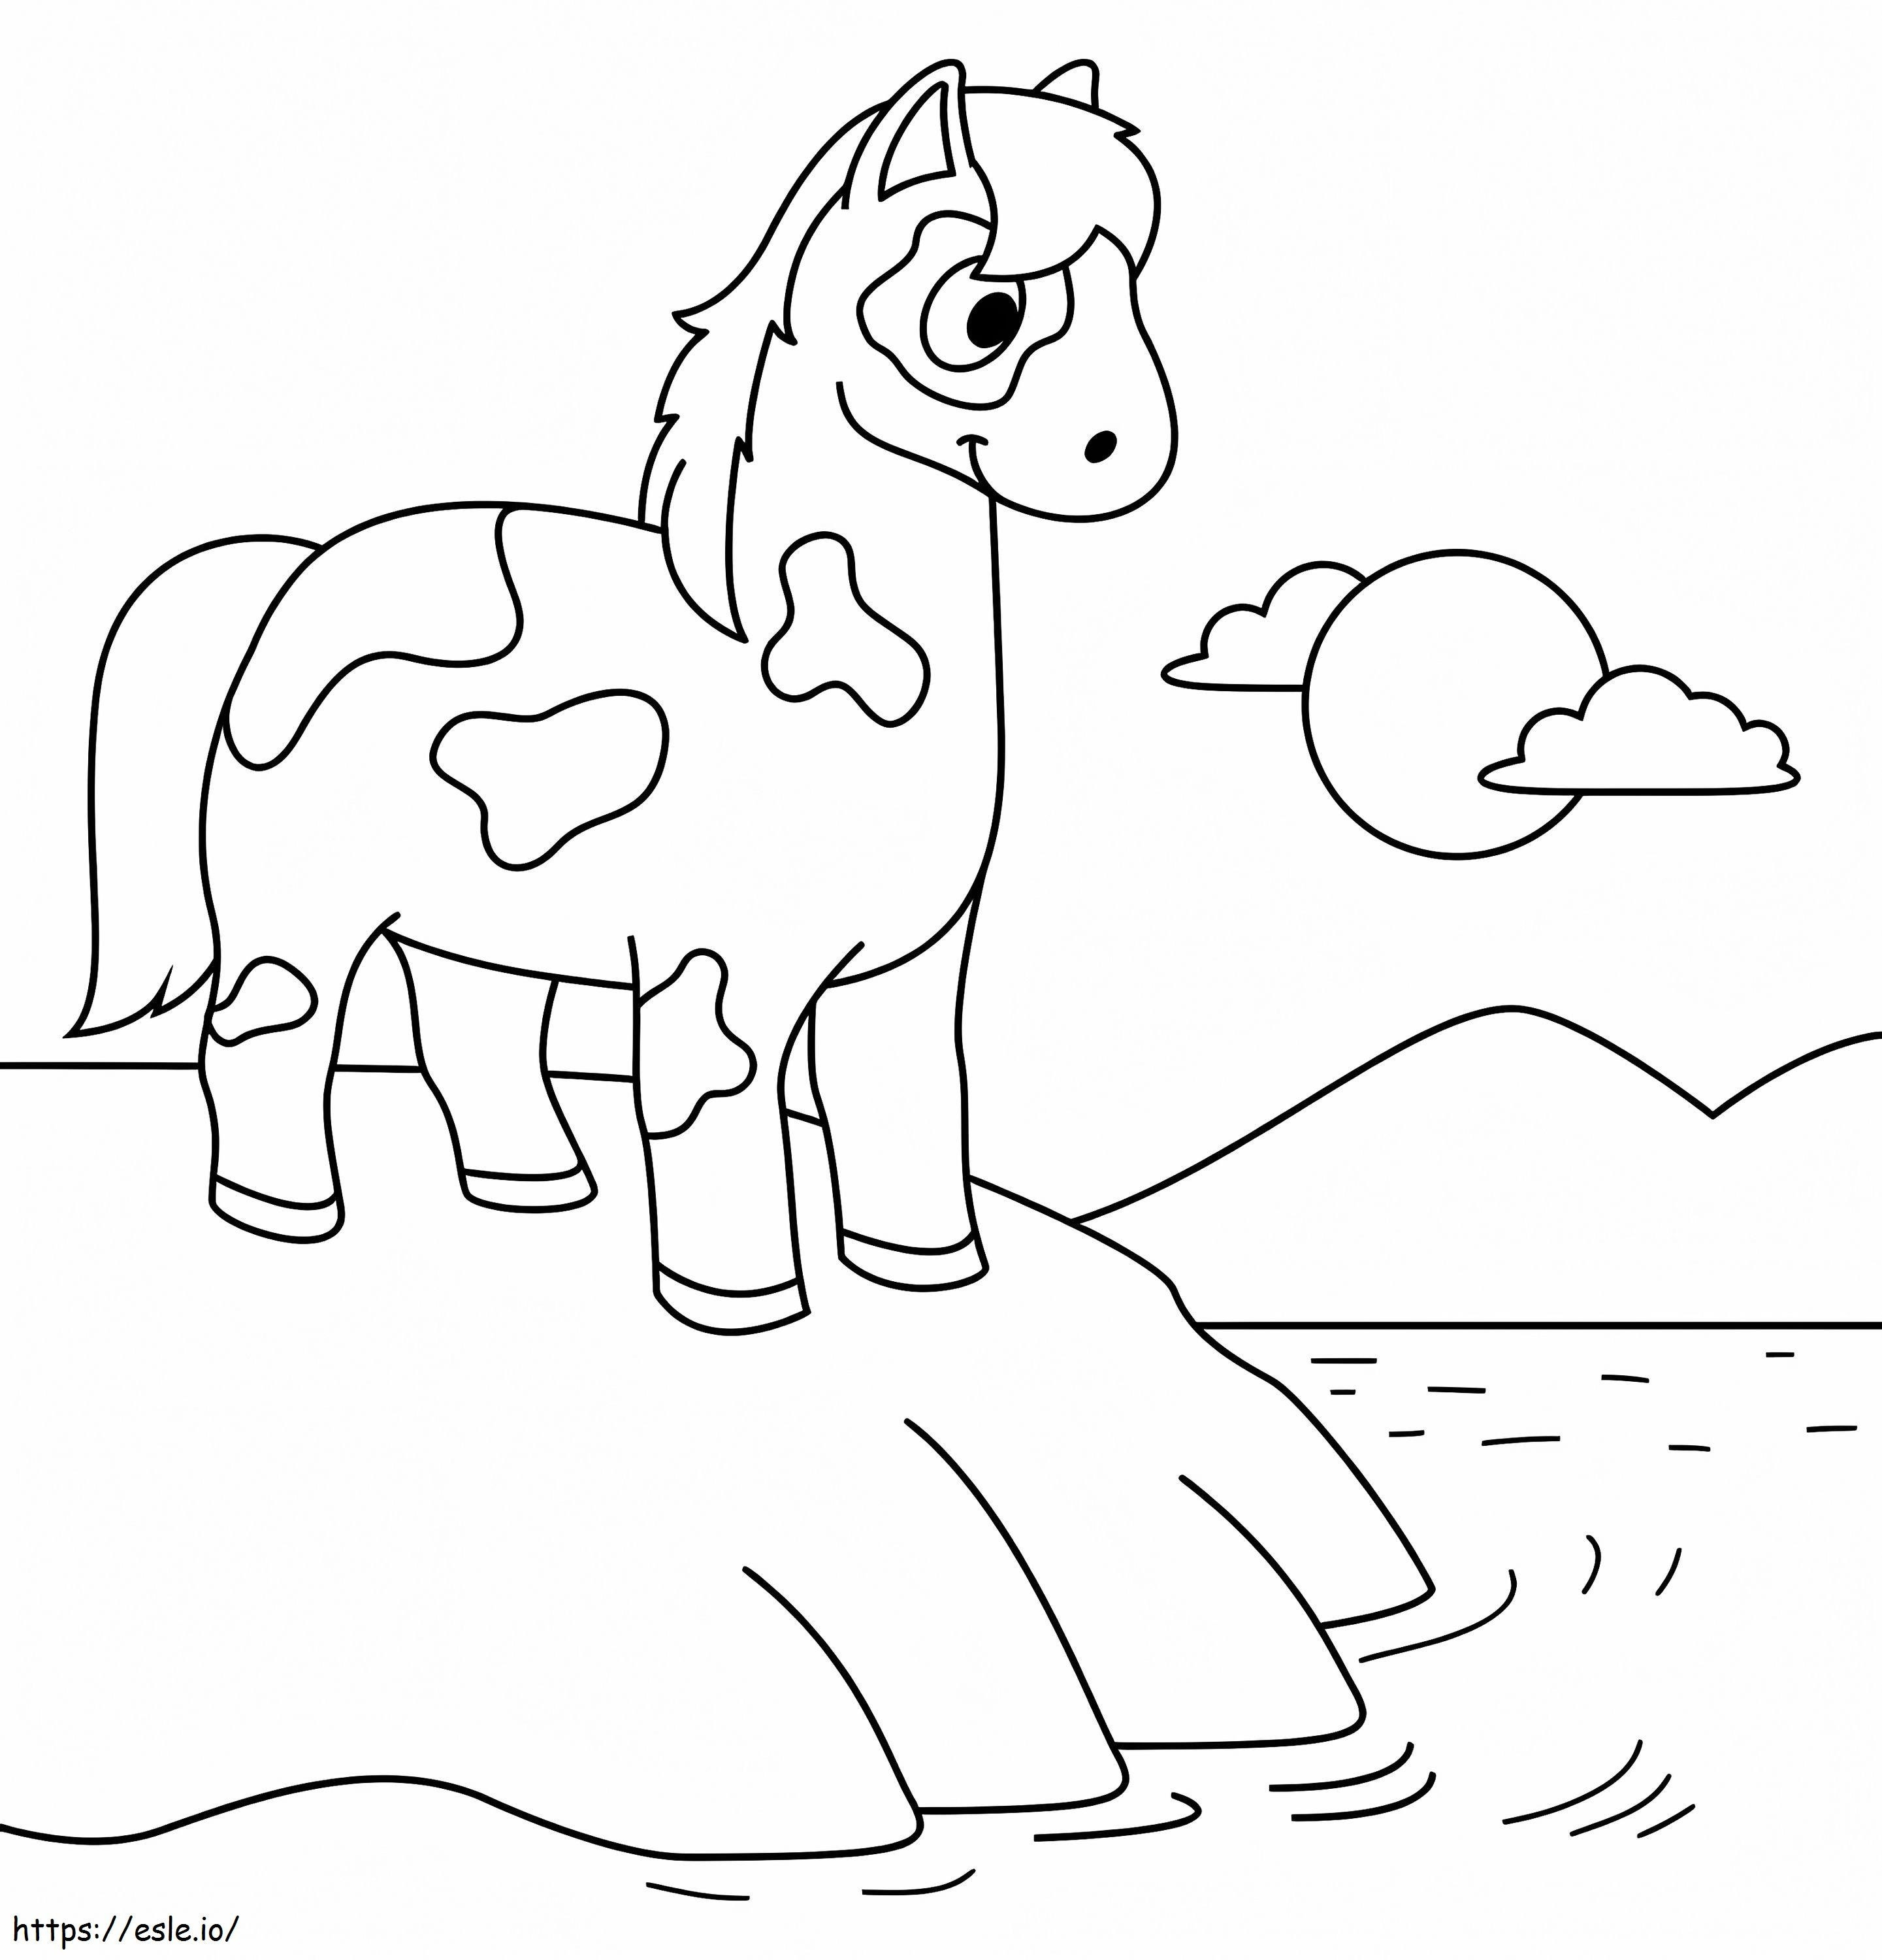 Horse On The Beach coloring page